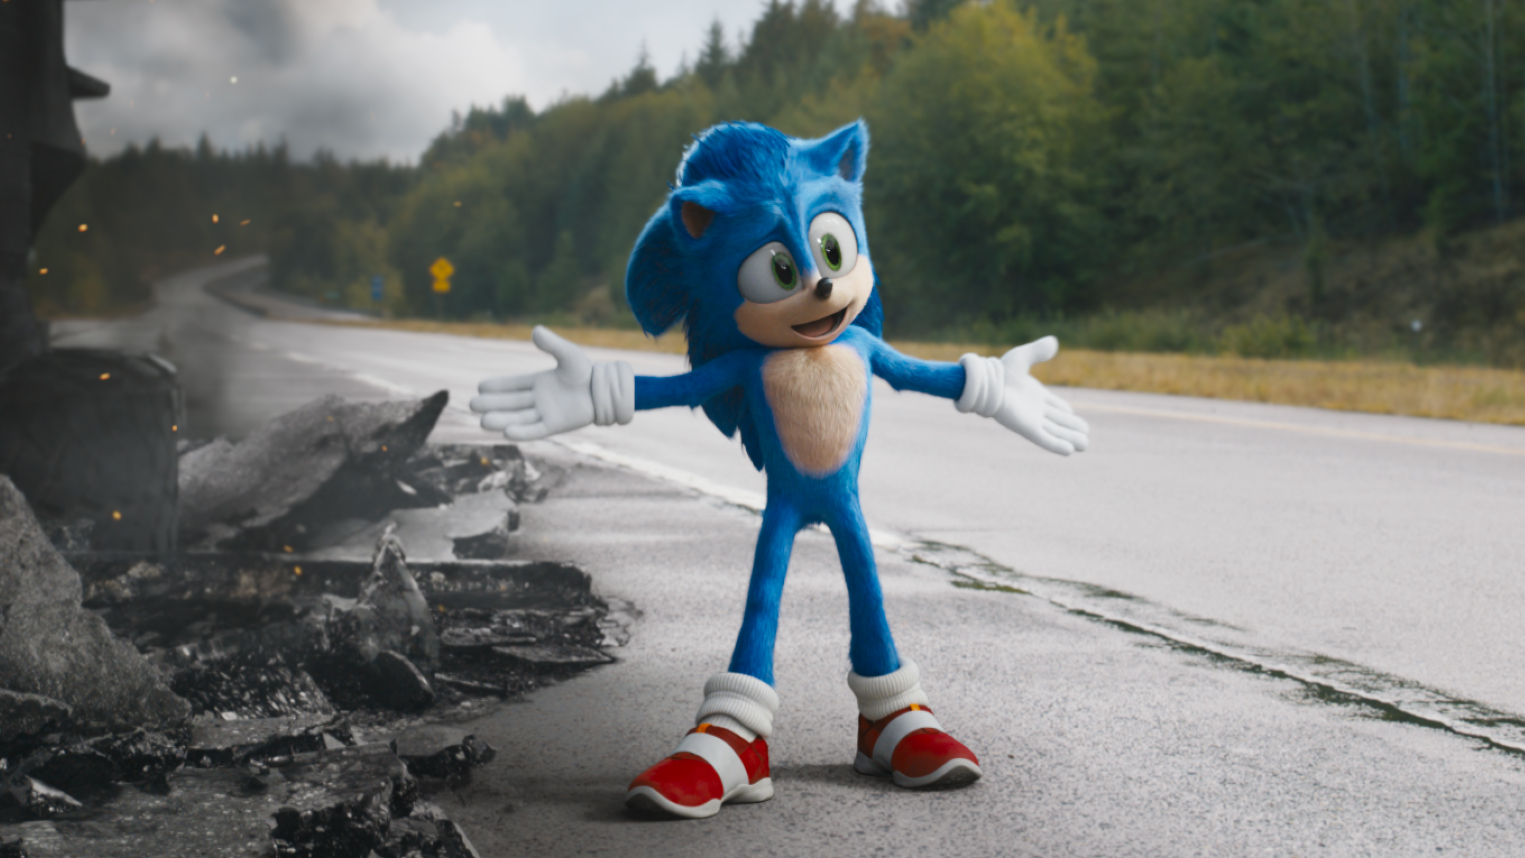 Sonic the Hedgehog 2 Character Posters Released